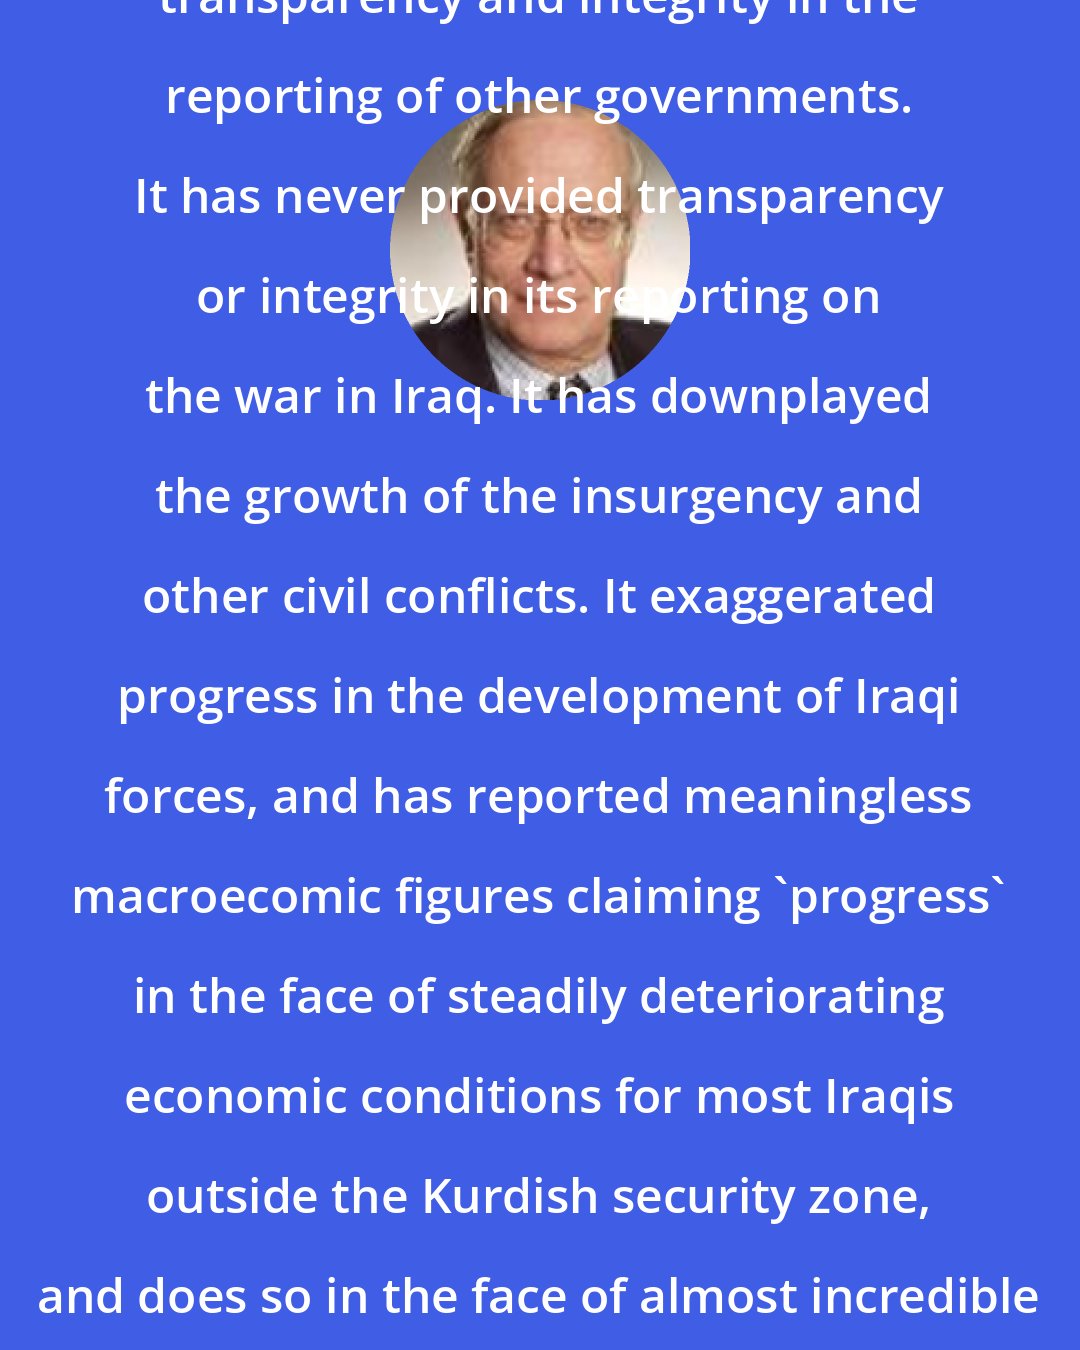 Anthony H. Cordesman: The US is often the first to call for transparency and integrity in the reporting of other governments. It has never provided transparency or integrity in its reporting on the war in Iraq. It has downplayed the growth of the insurgency and other civil conflicts. It exaggerated progress in the development of Iraqi forces, and has reported meaningless macroecomic figures claiming 'progress' in the face of steadily deteriorating economic conditions for most Iraqis outside the Kurdish security zone, and does so in the face of almost incredible incompetence by USAID and the Corps of Engineers.